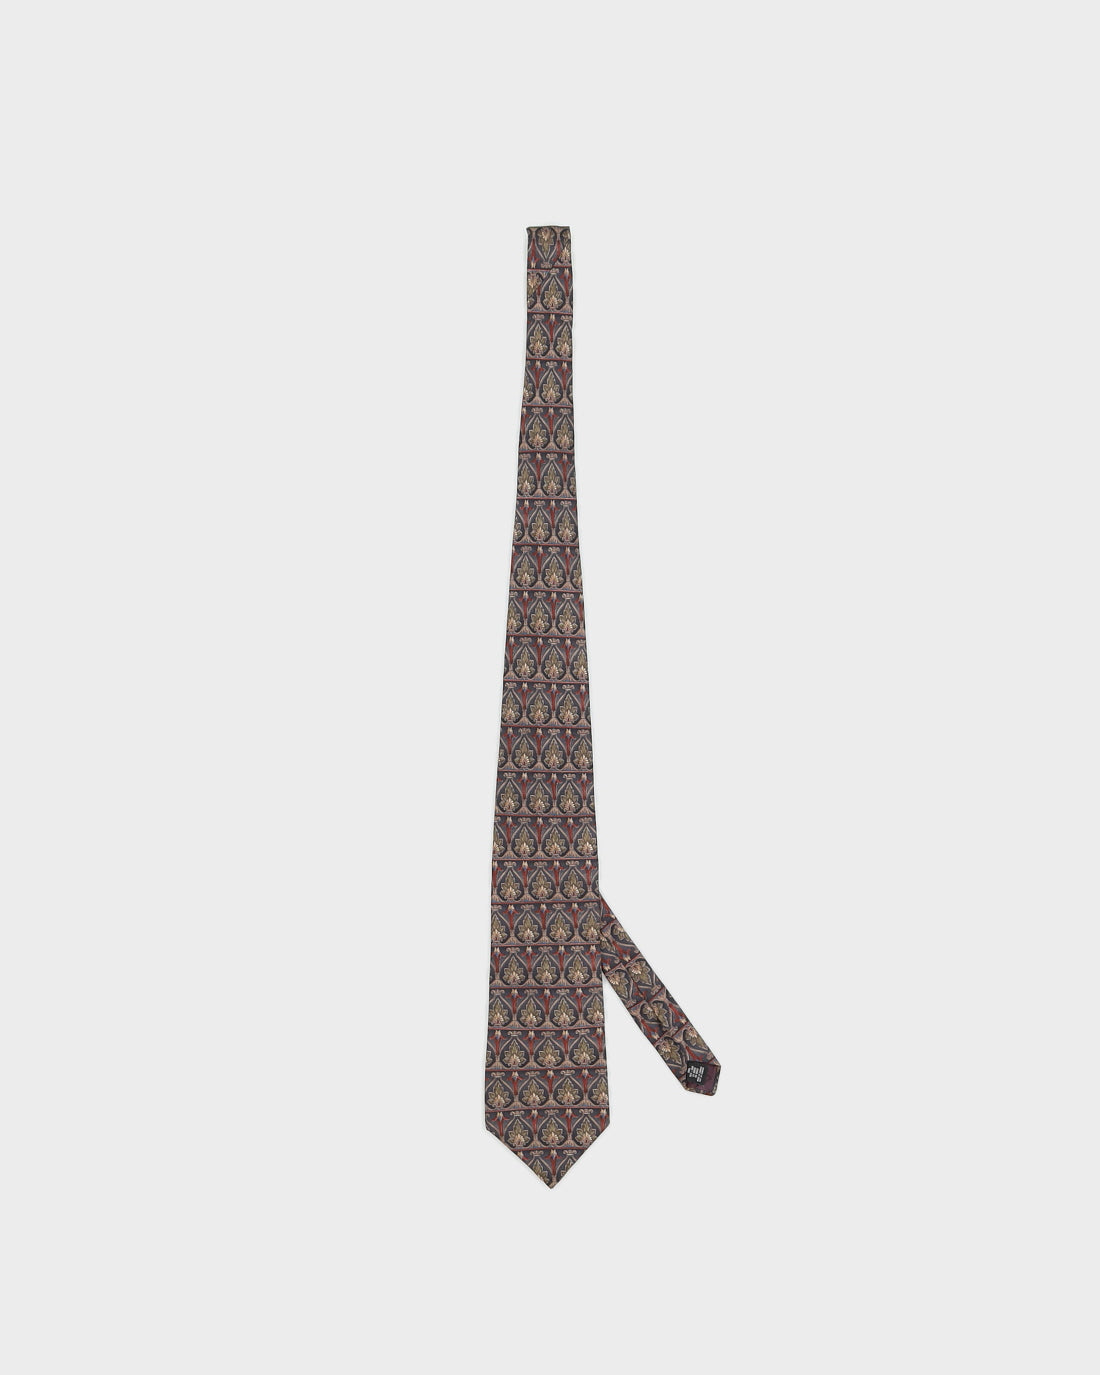 Christian Dior Blue Patterned Tie